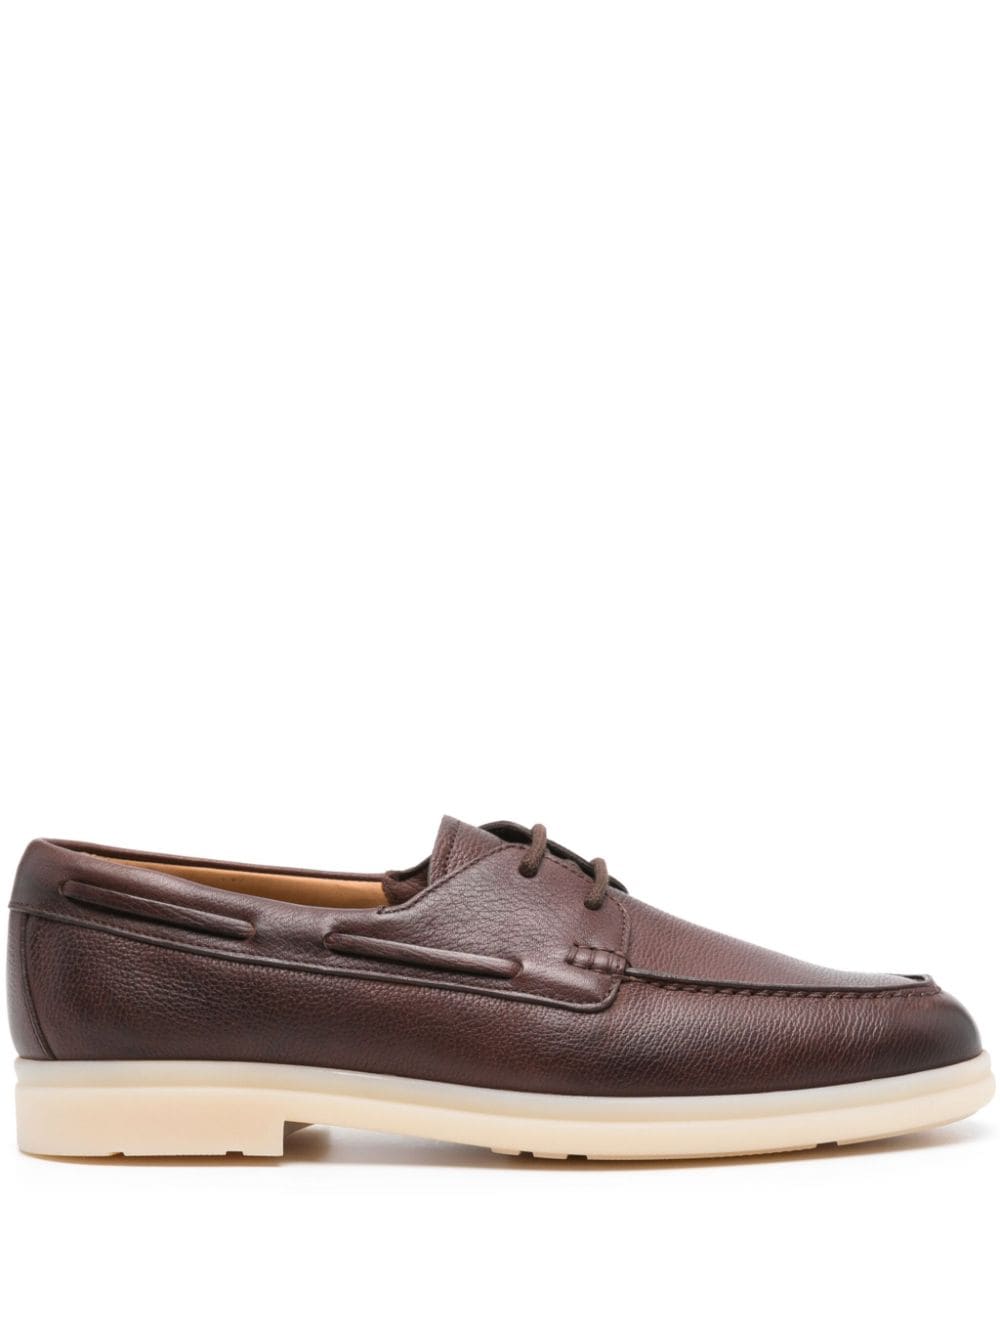 Church's leather boat shoes - Brown von Church's